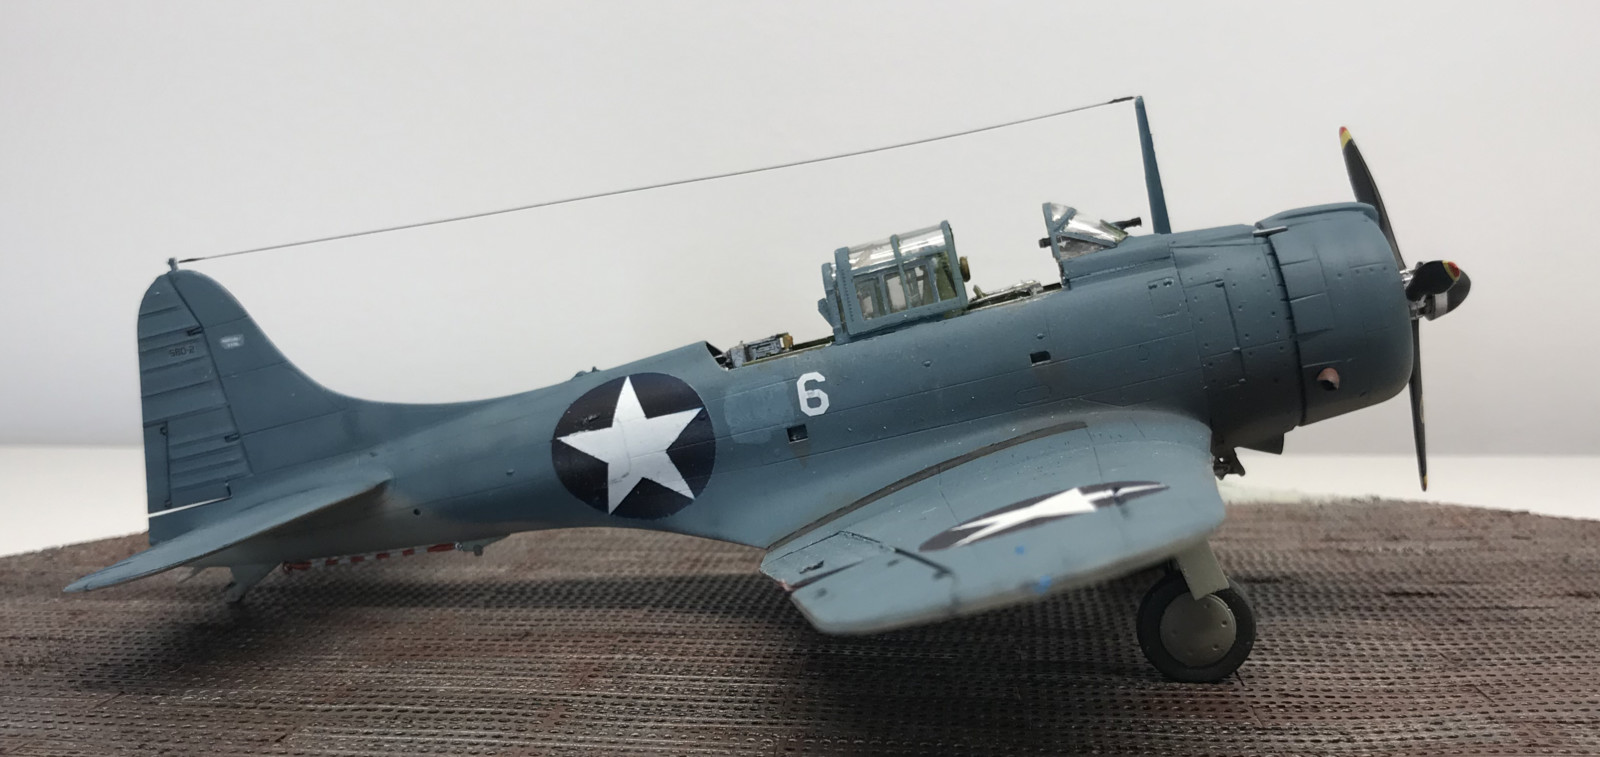 the-attack-of-the-hand-me-downs-the-sbd-2-dauntless-story-from